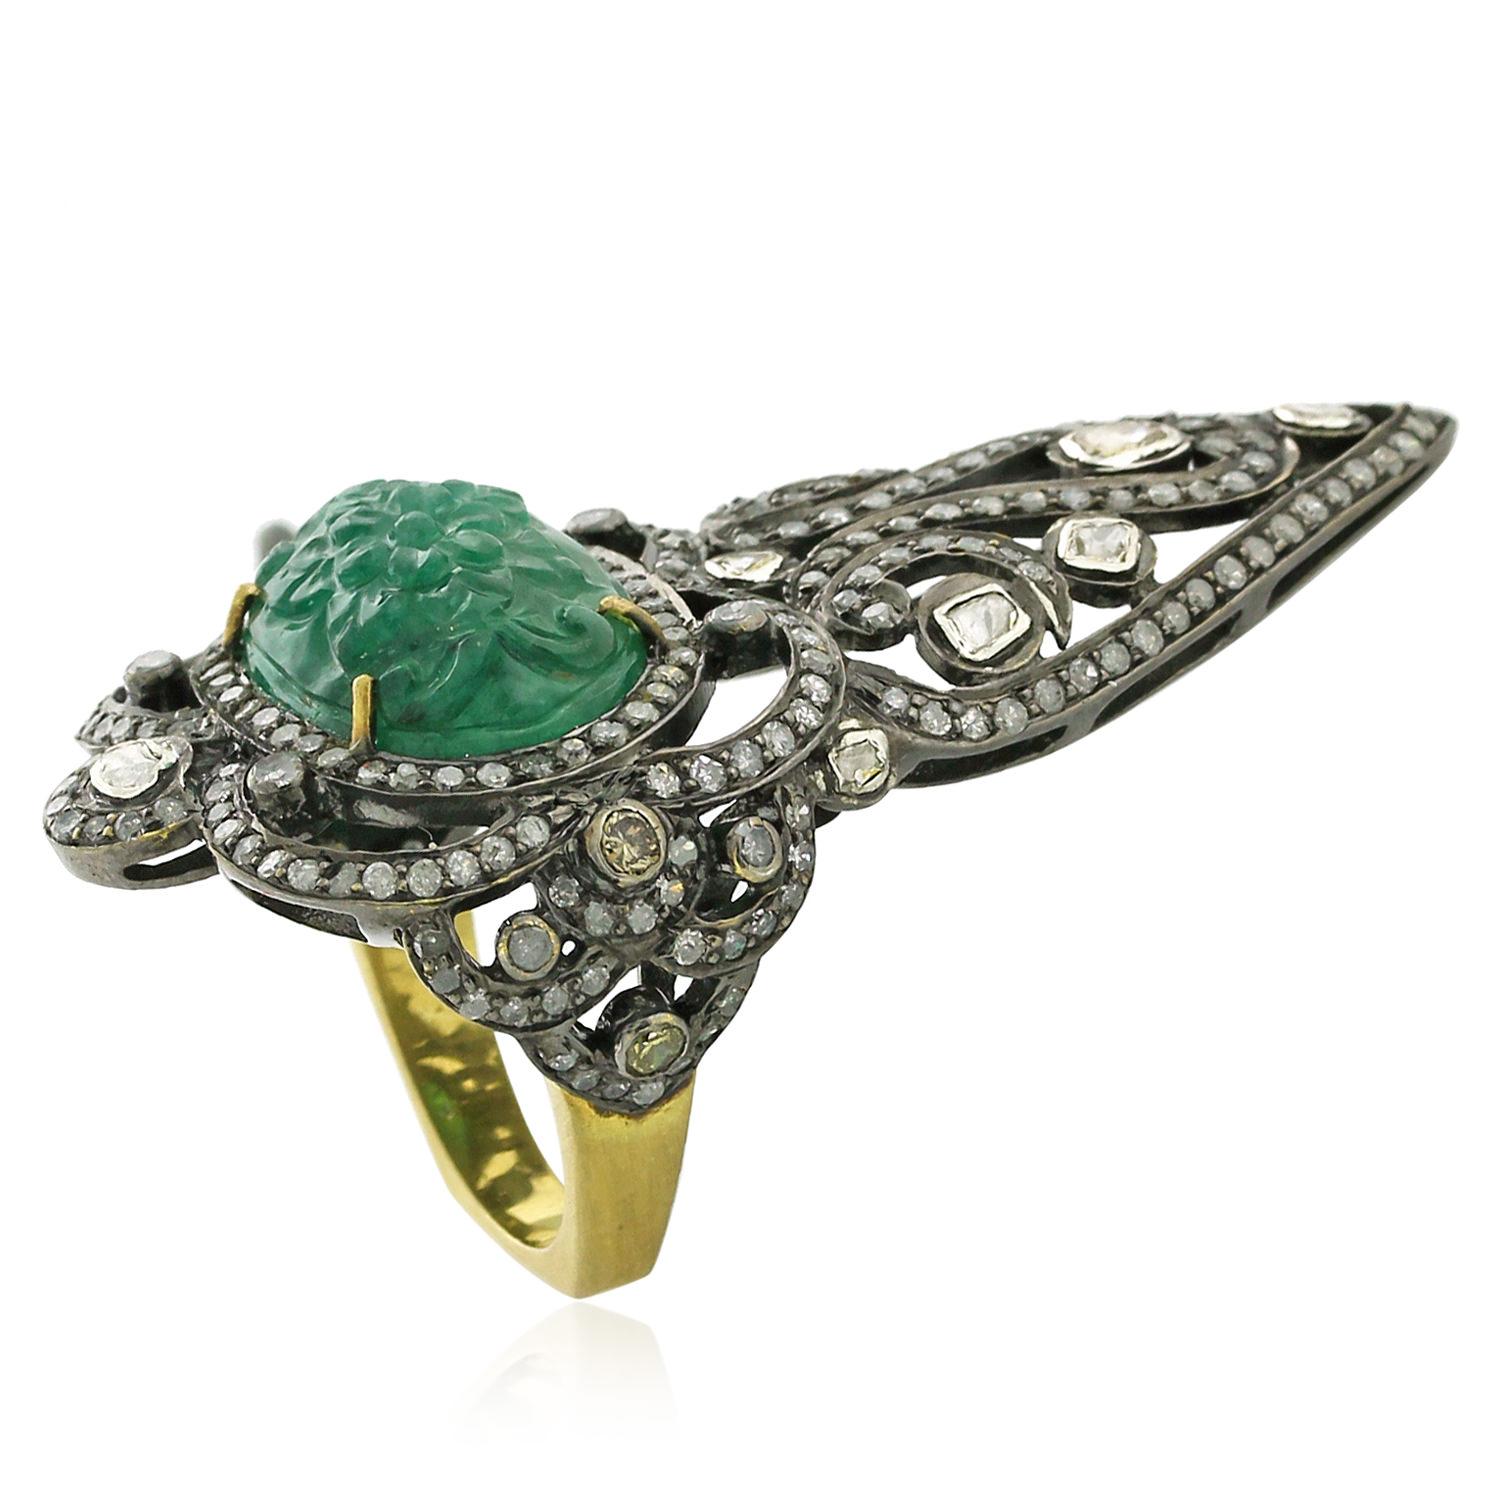 Oval shape carved emerald knuckle ring with pave and rosecut diamonds is pretty chic yet classic looking.

Ring Size: 7 ( can be sized )

18k: 3.12g
Diamond: 3.35ct
Slv: 8.31gm
Emerald: 9.10ct